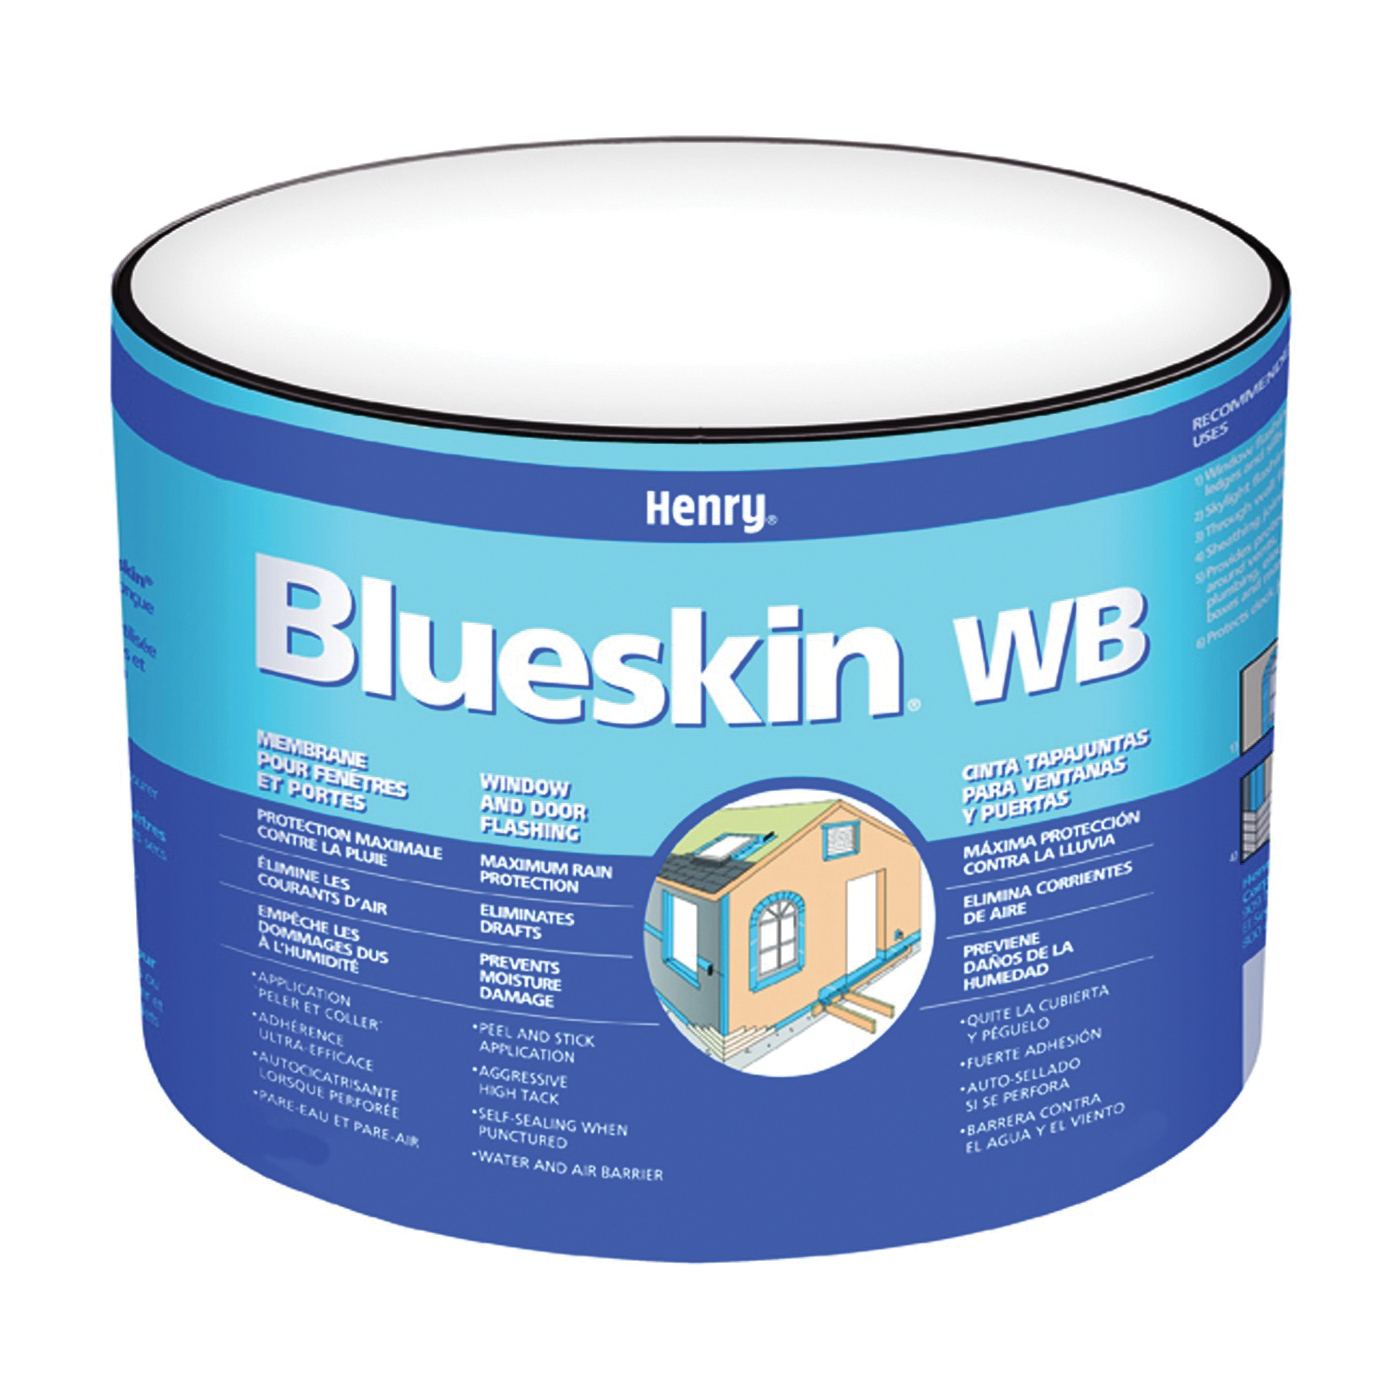 WB25 HE201WB968 Window and Door Flashing, 75 ft L, 6 in W, Paper, Blue, Self-Adhesive